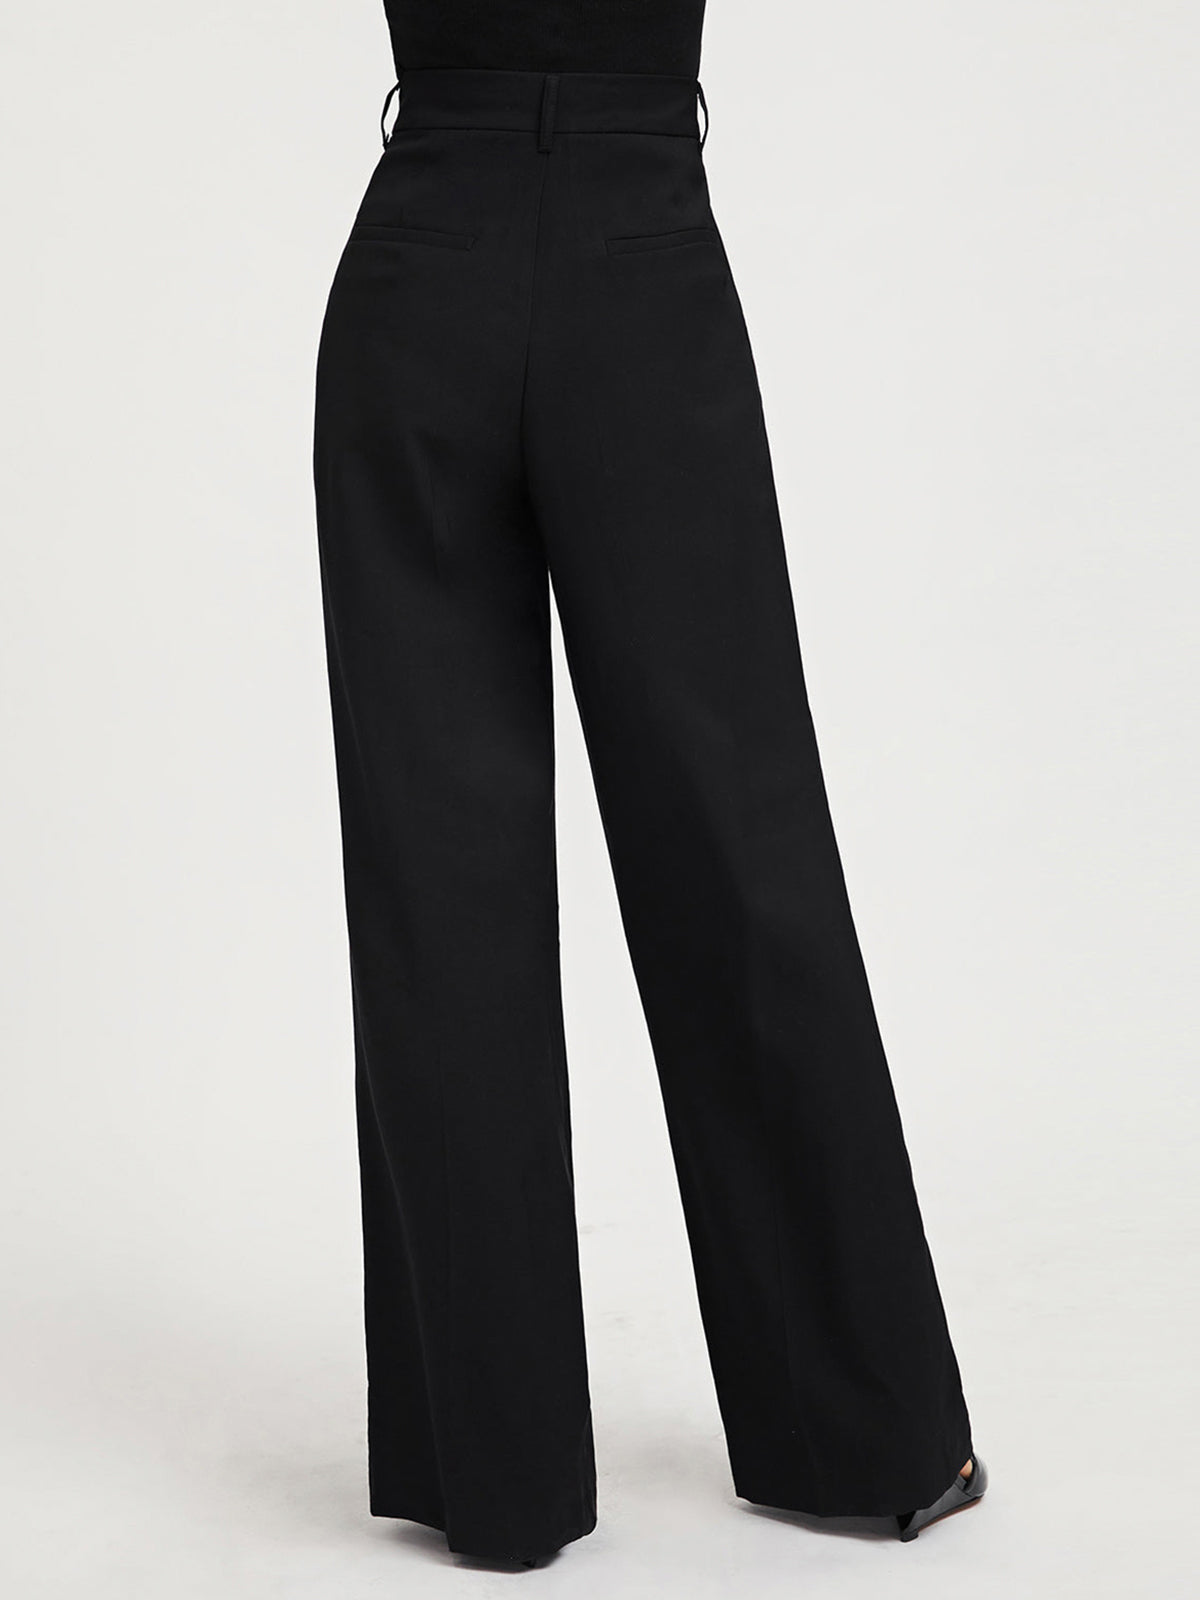 Women's High-rise Skinny Ankle Pants - A New Day™ Black 4 : Target